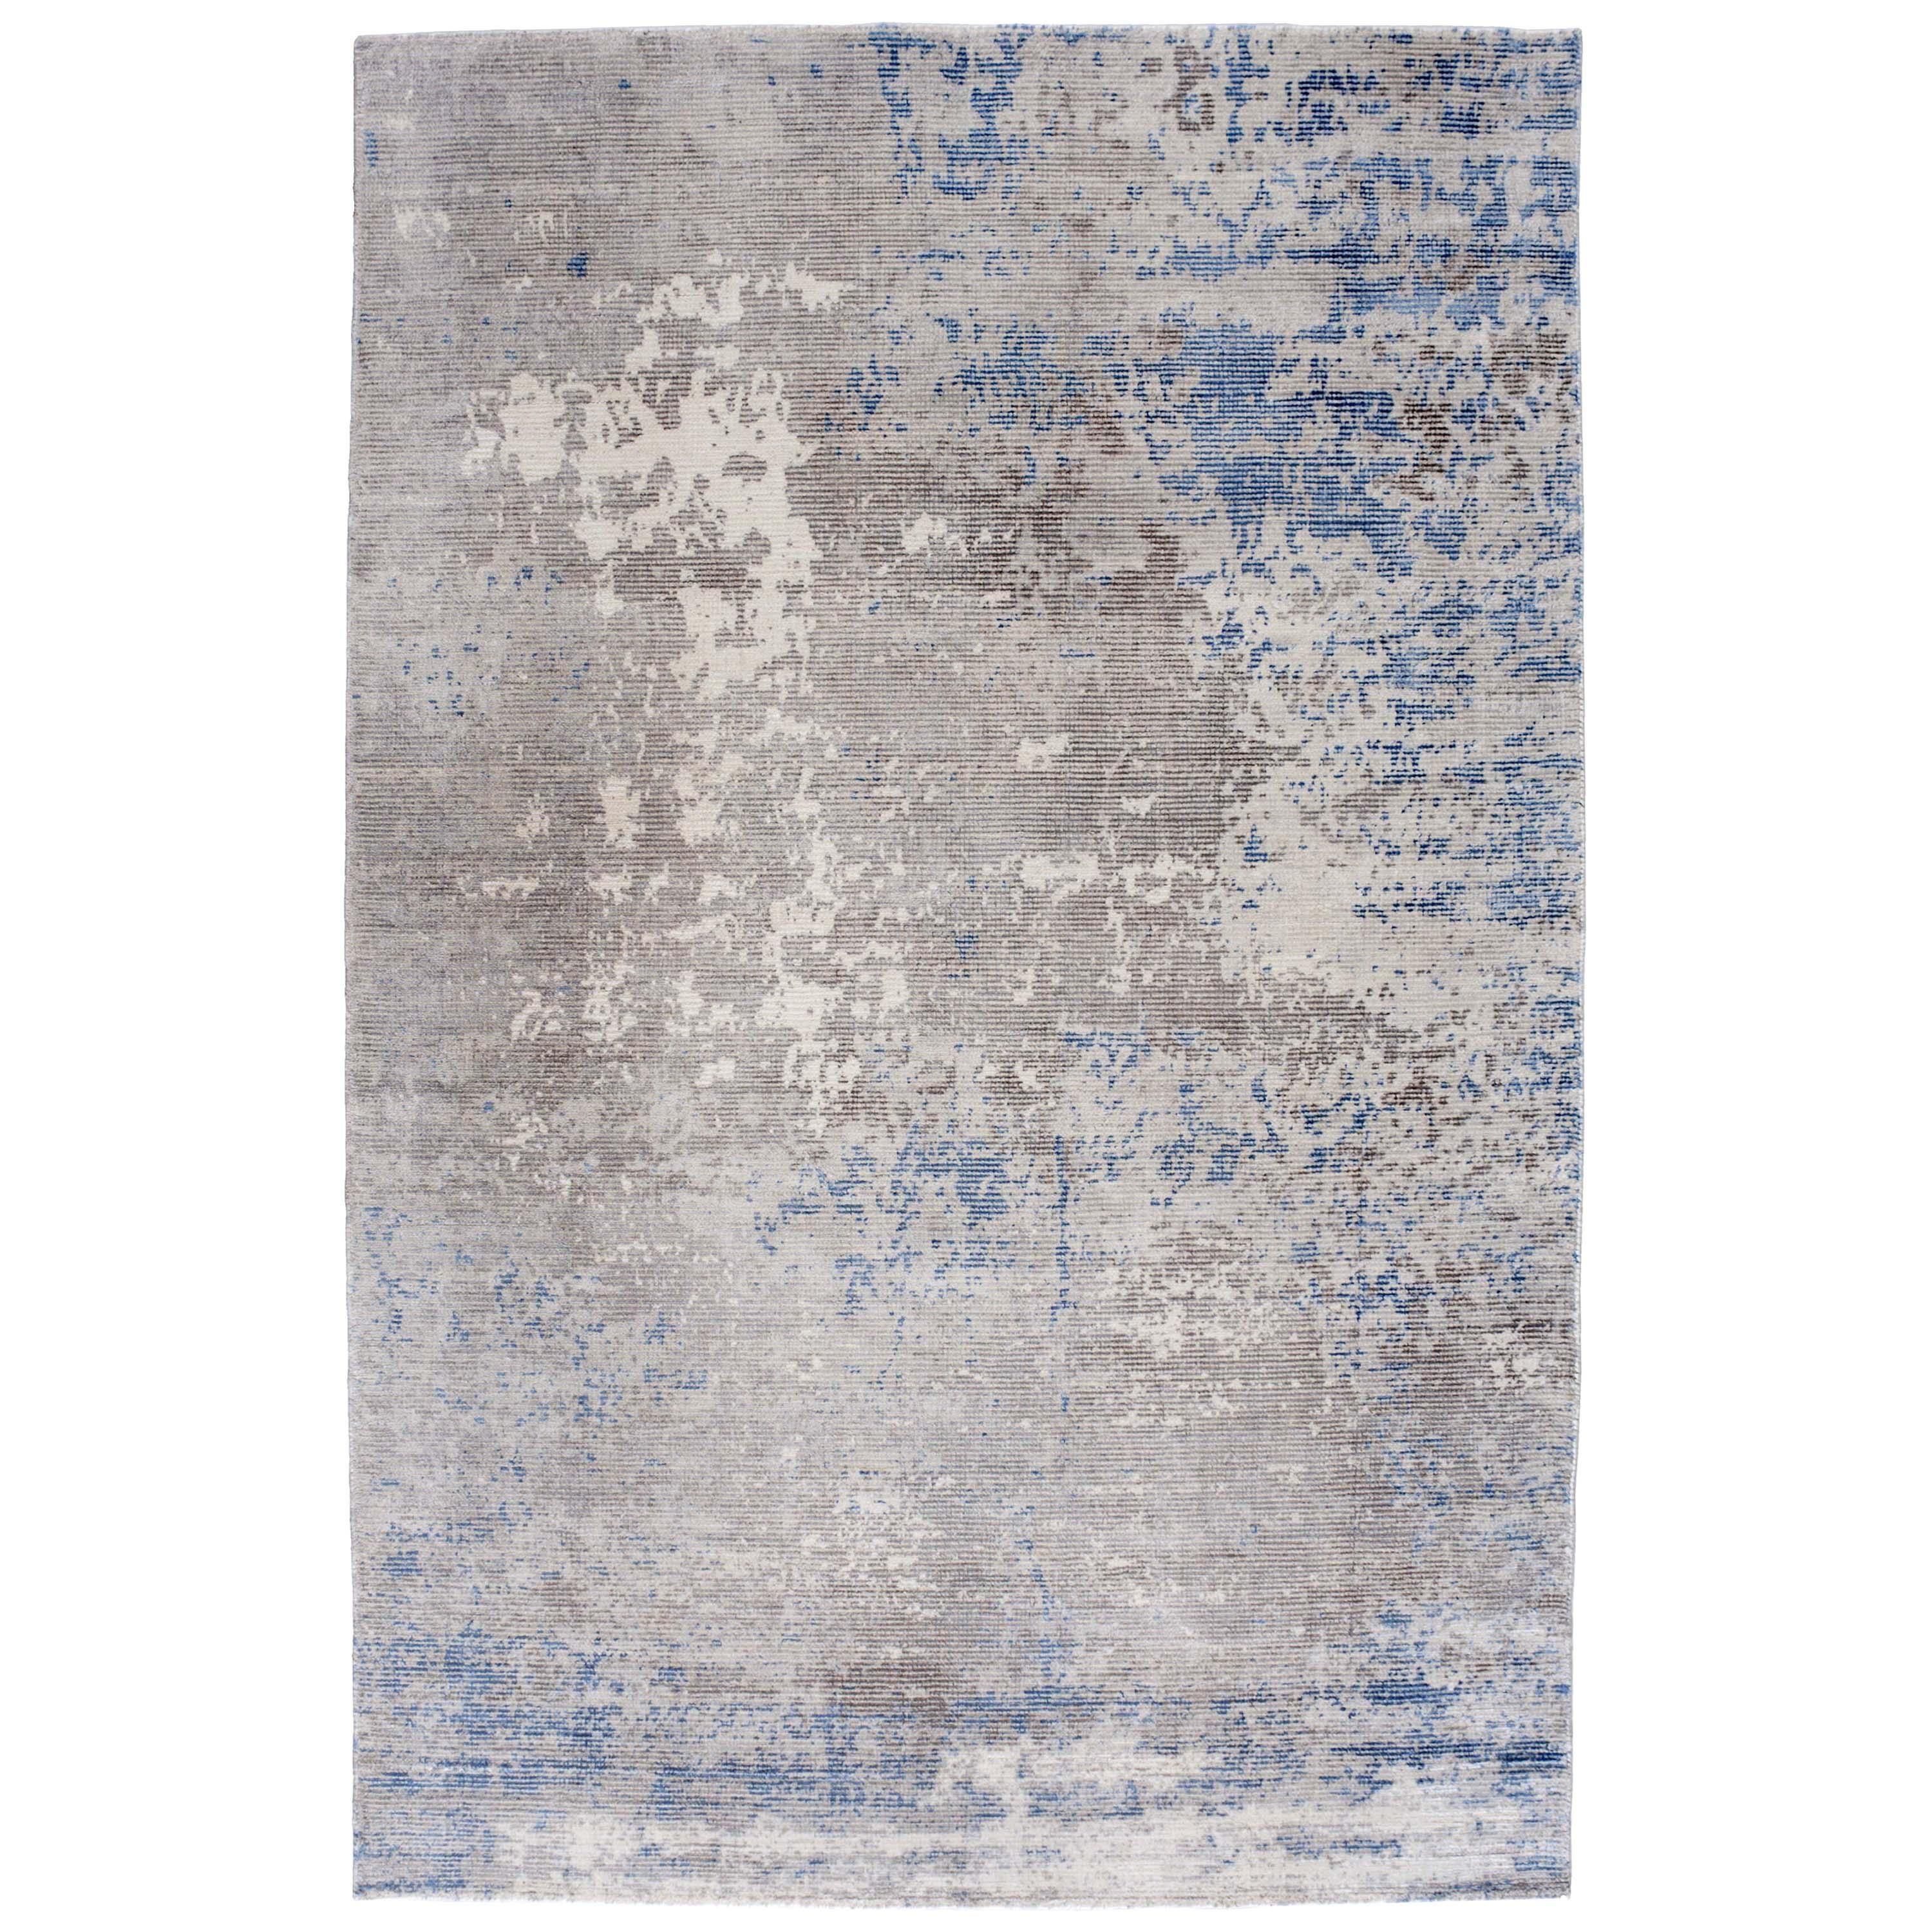 Abstract Rug in Grays and Blues